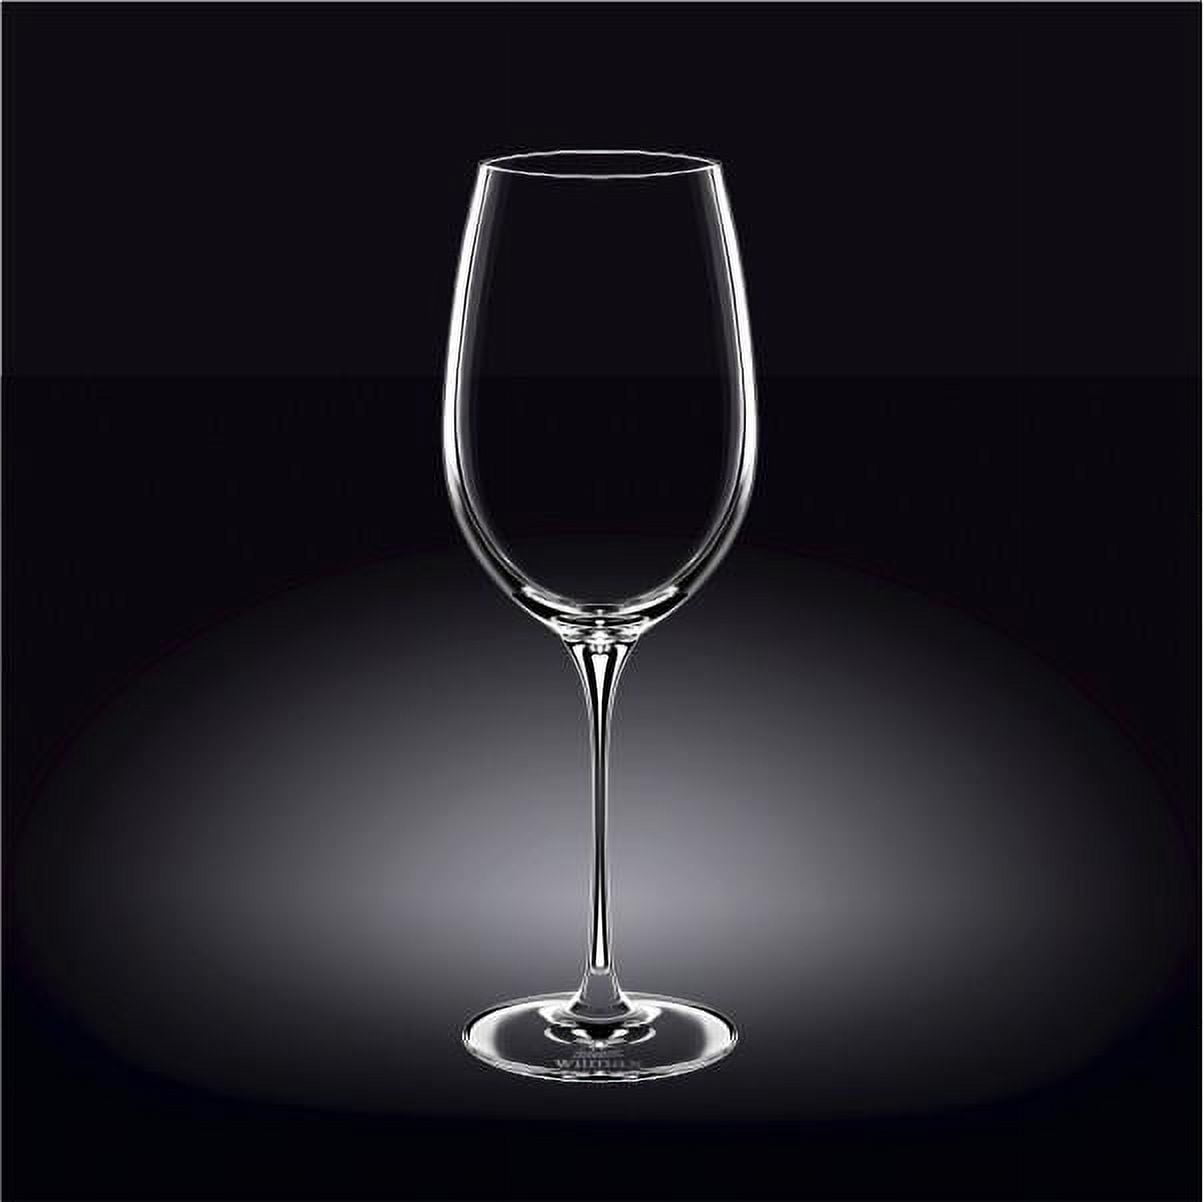 G Francis Large 'Red Wine' Glasses Set of 4 - Slant Rim Wine Glass with Stem, Size: One Size